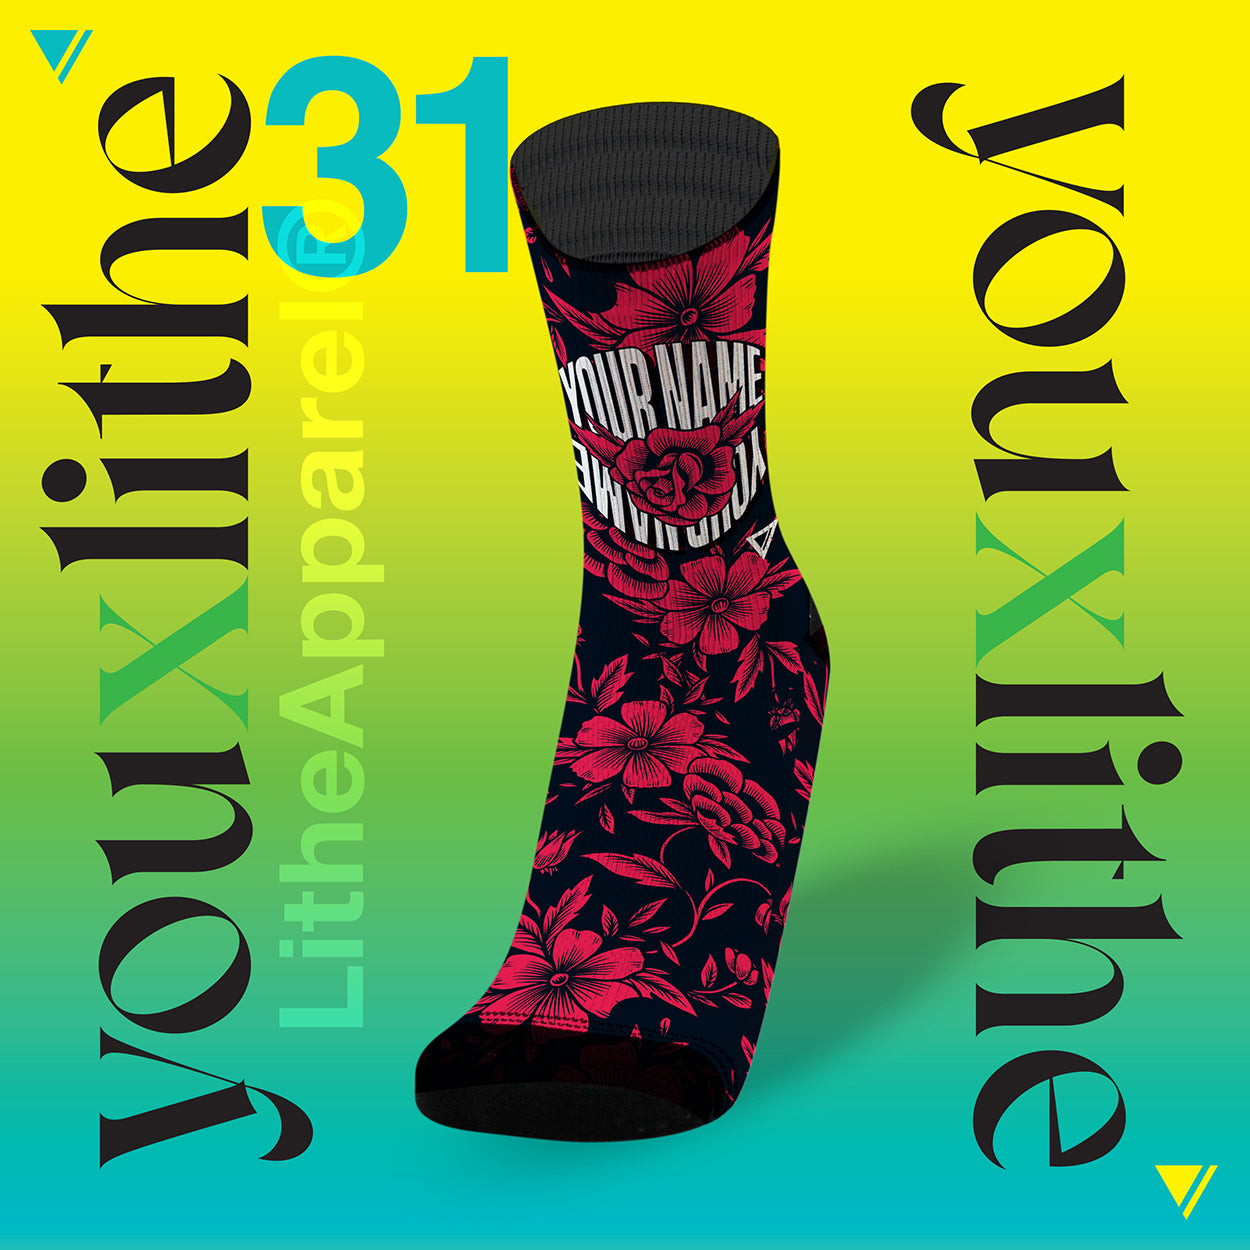 YOU X LITHE, CALCETINES PERSONALIZADOS